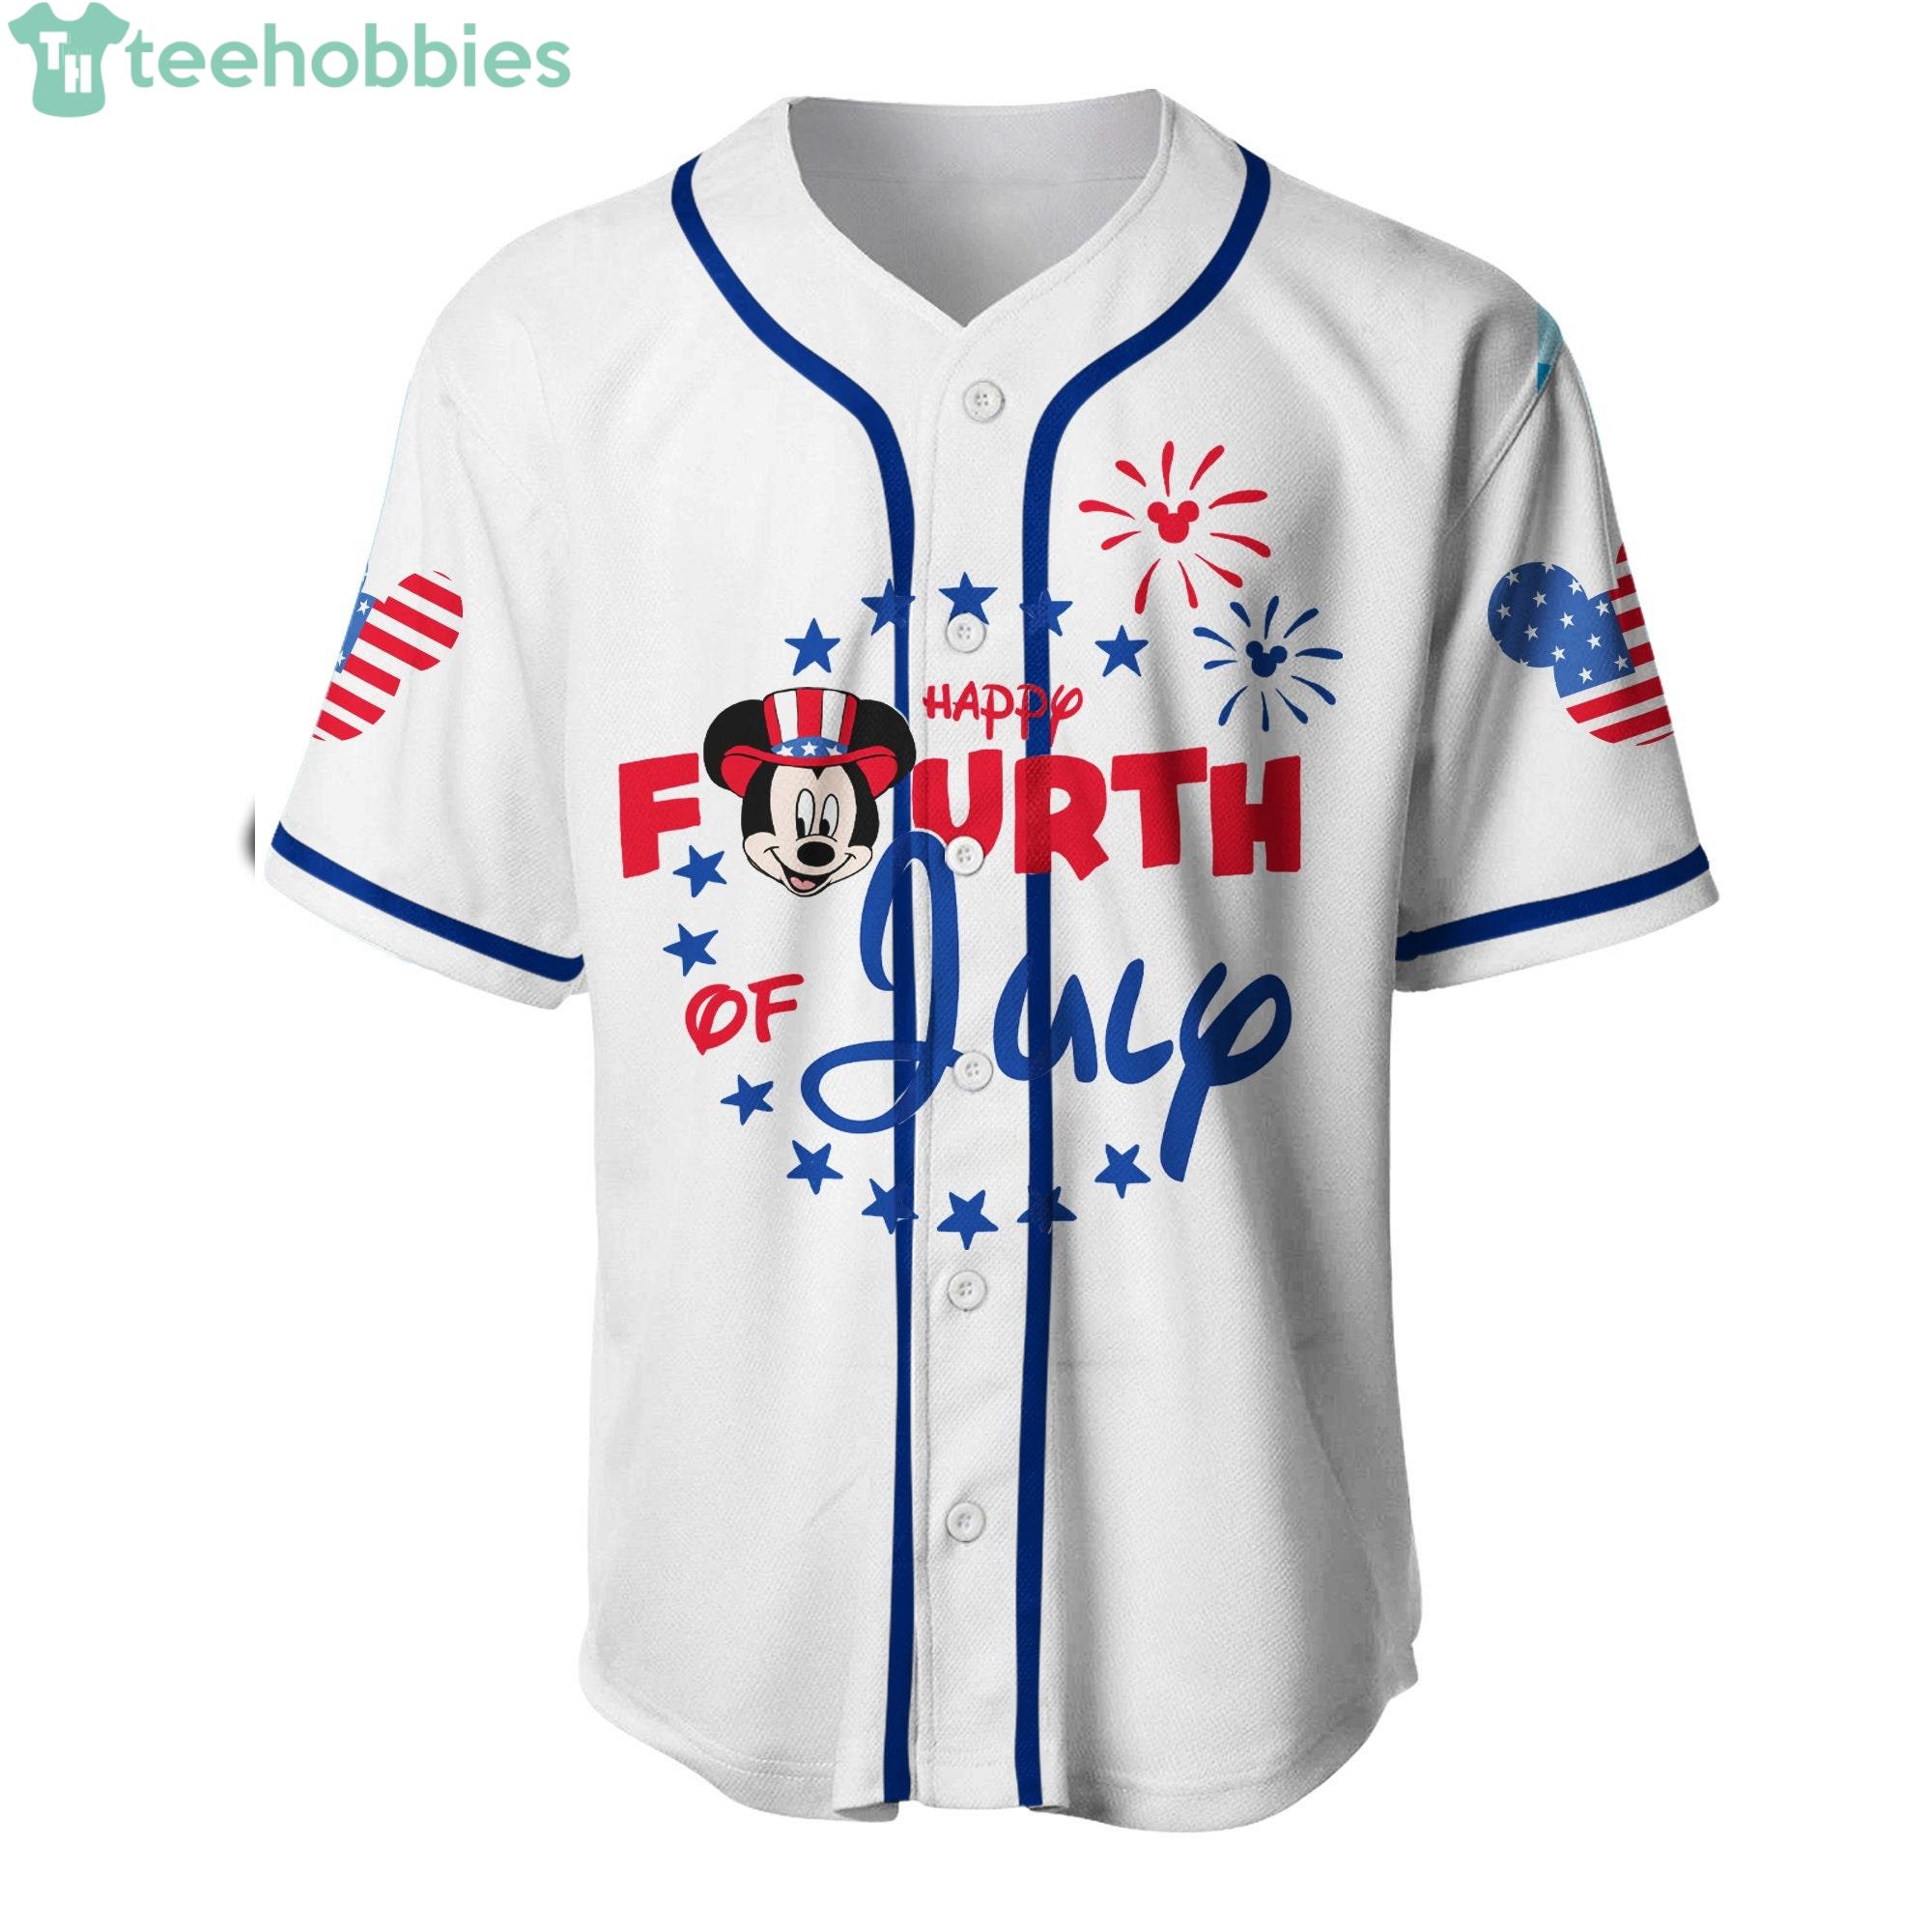 Mickey Mouse Baseball Jersey for Adults